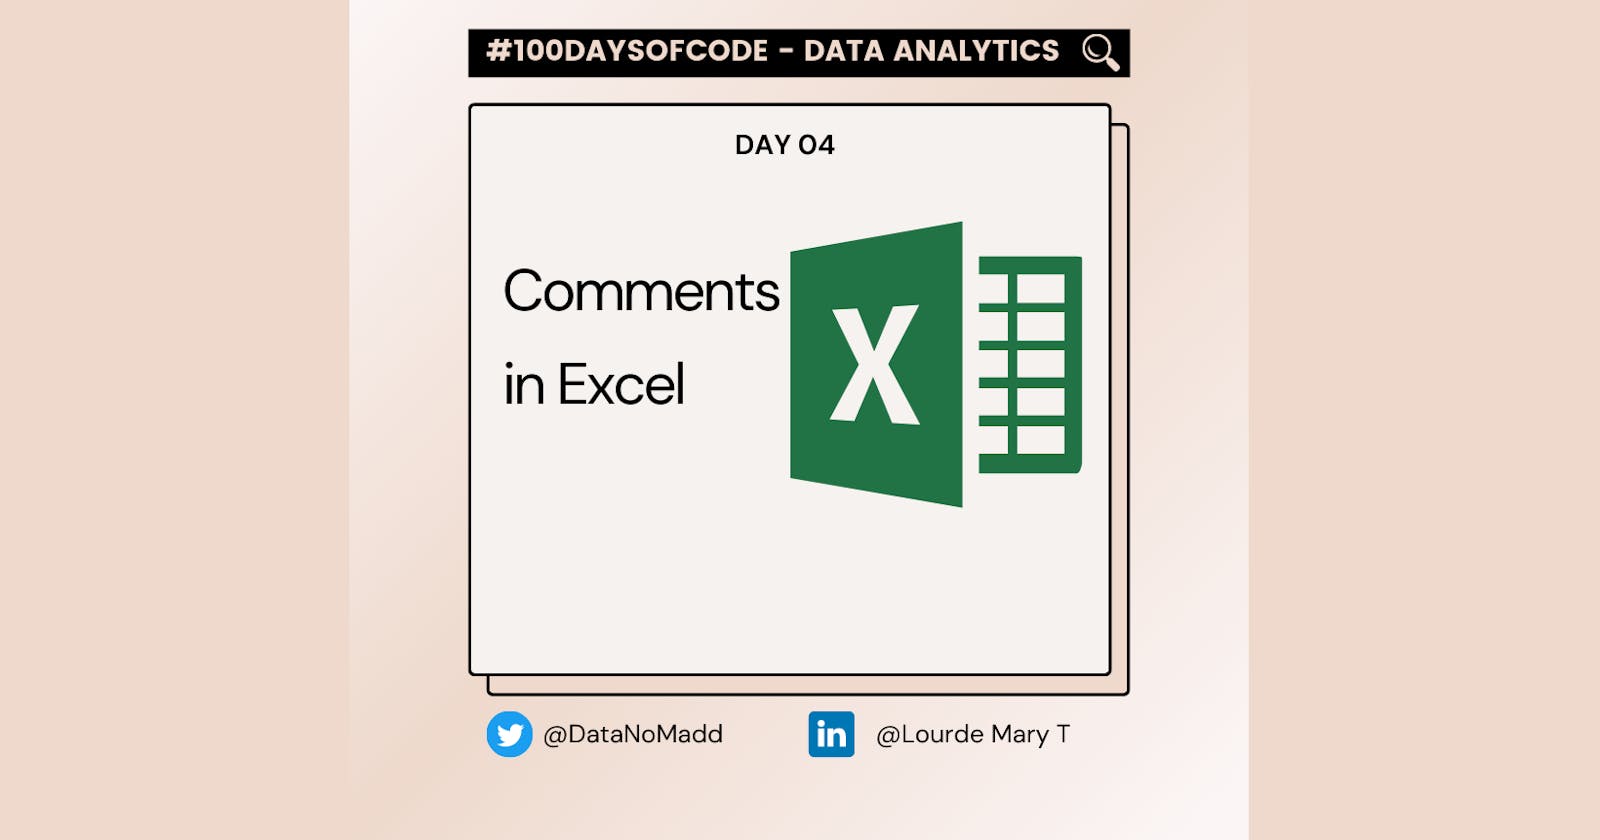 Day 04 of 100 Days Of Code in Data Analytics : Comments in Excel